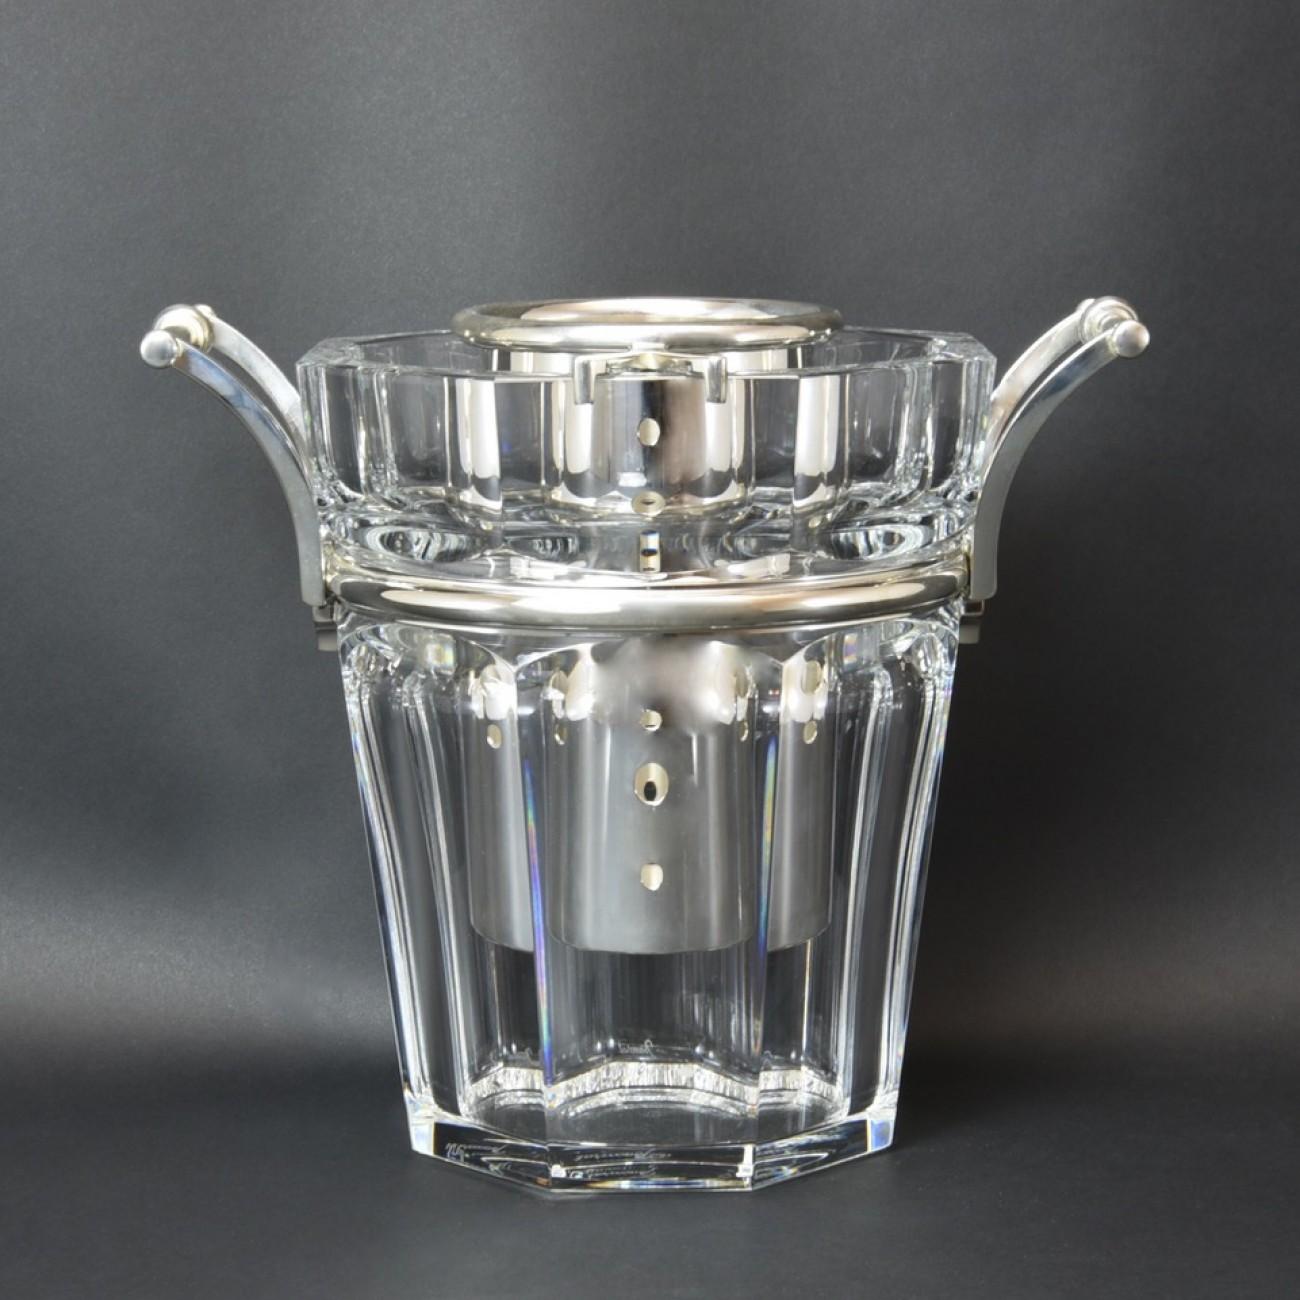 French Baccarat 'Moulin Rouge' Cut Crystal and Silver Plate Wine Cooler, circa 1985